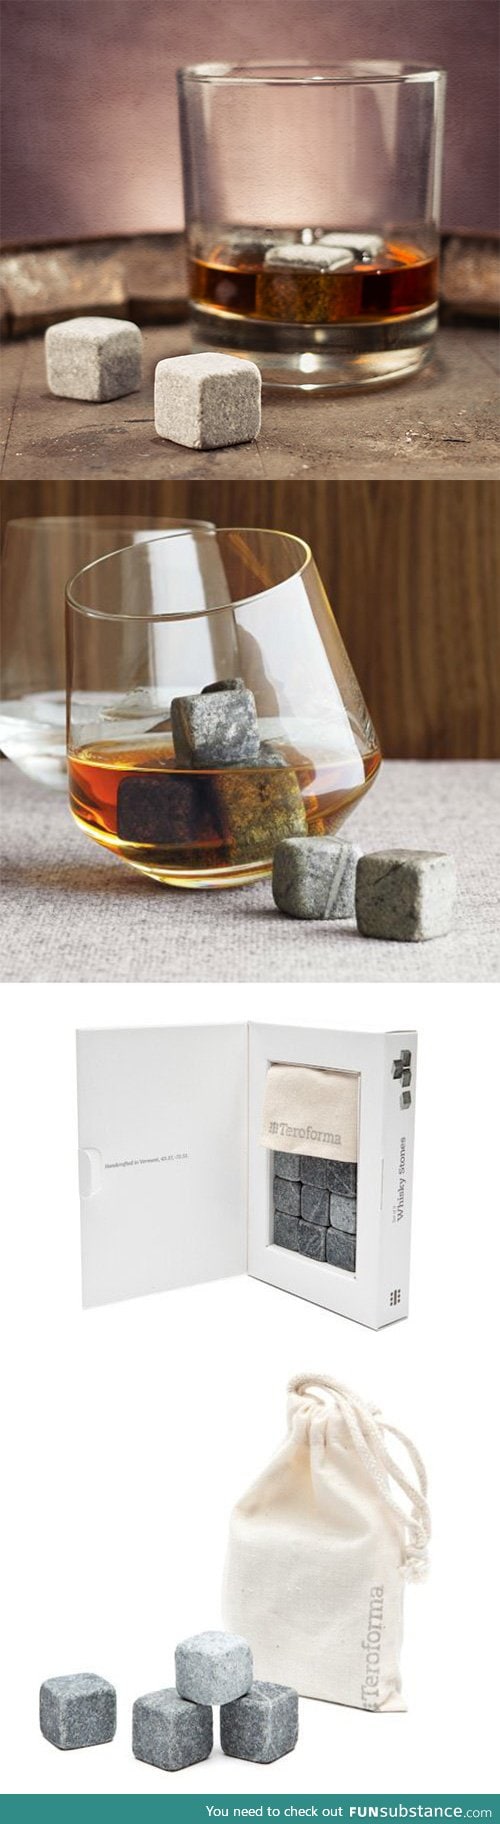 Ice Cube Stones - Make your drinks cold without watering it down